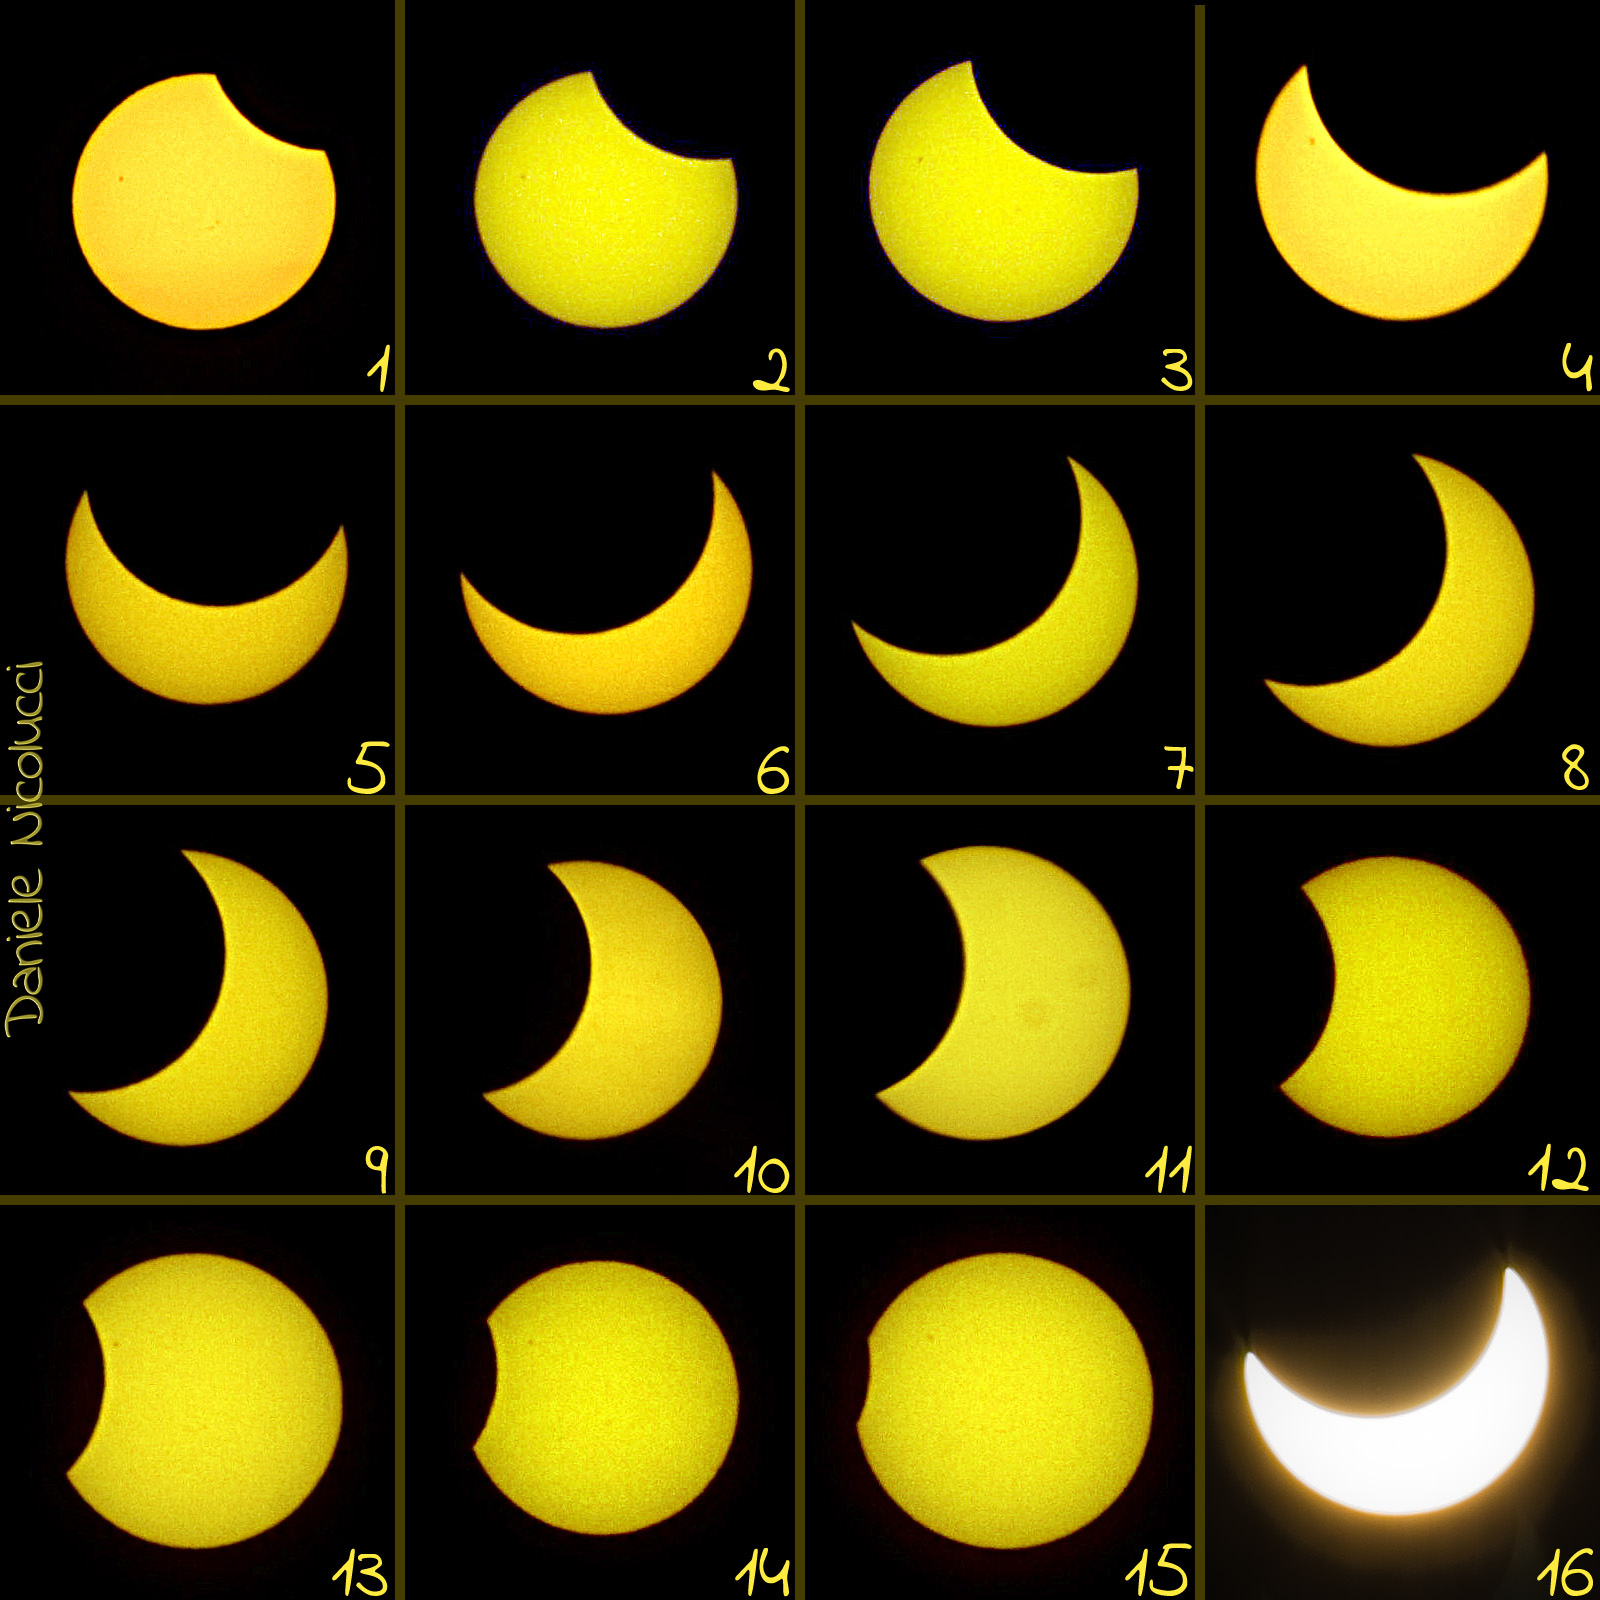 Phases of a solar eclipse progression measured over a month.